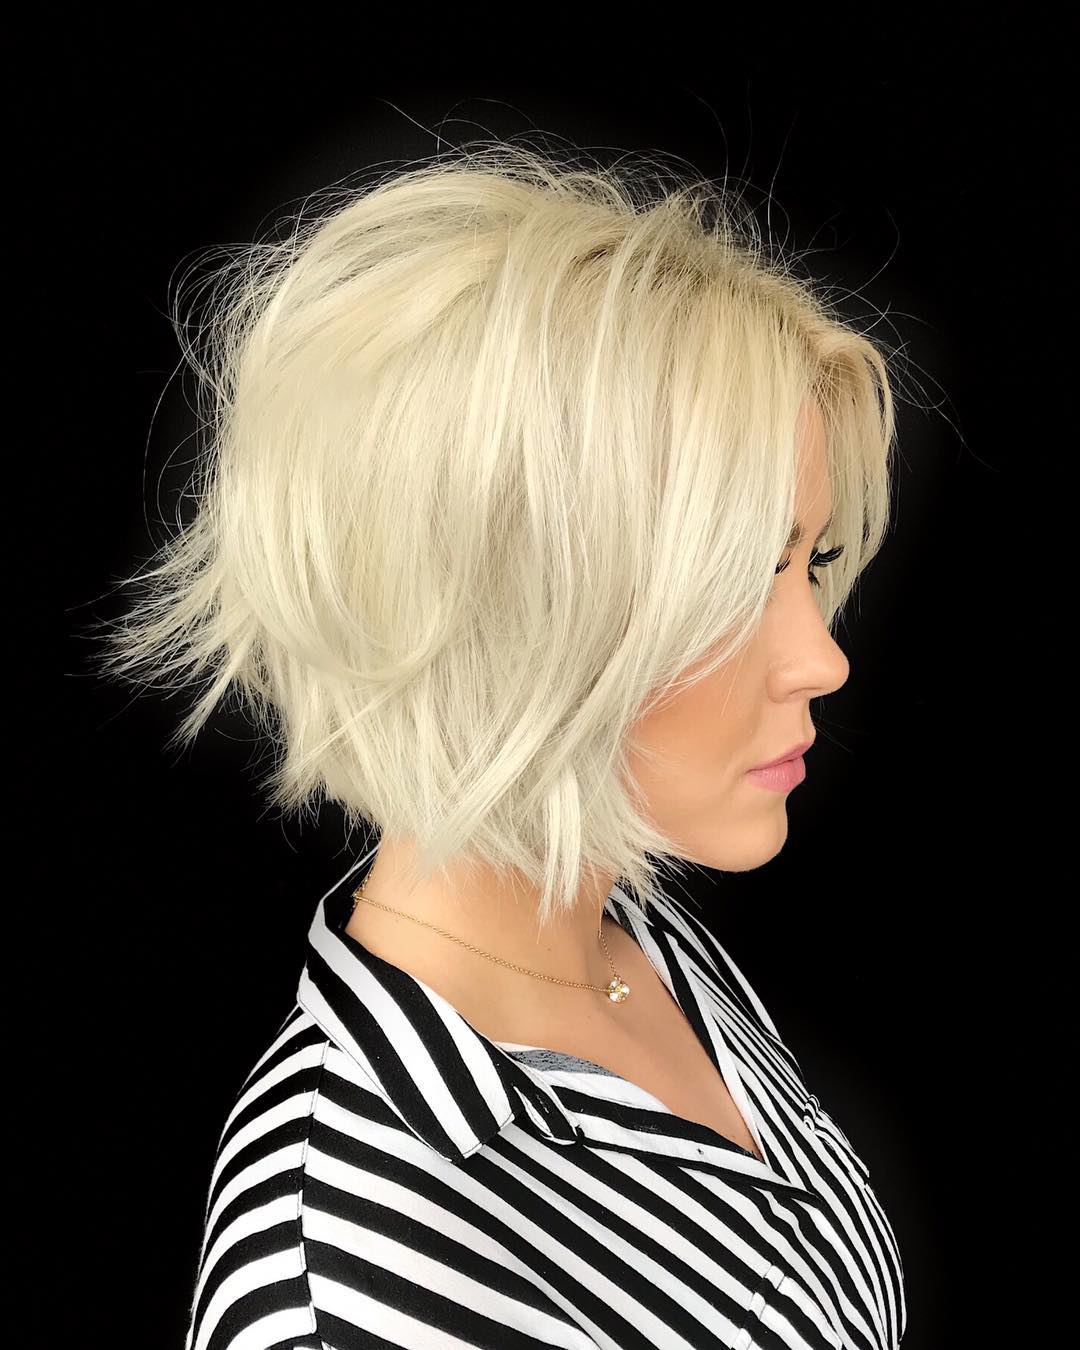 Top 10 Best Short Bob Hairstyles for Summer, Short Haircuts 2020